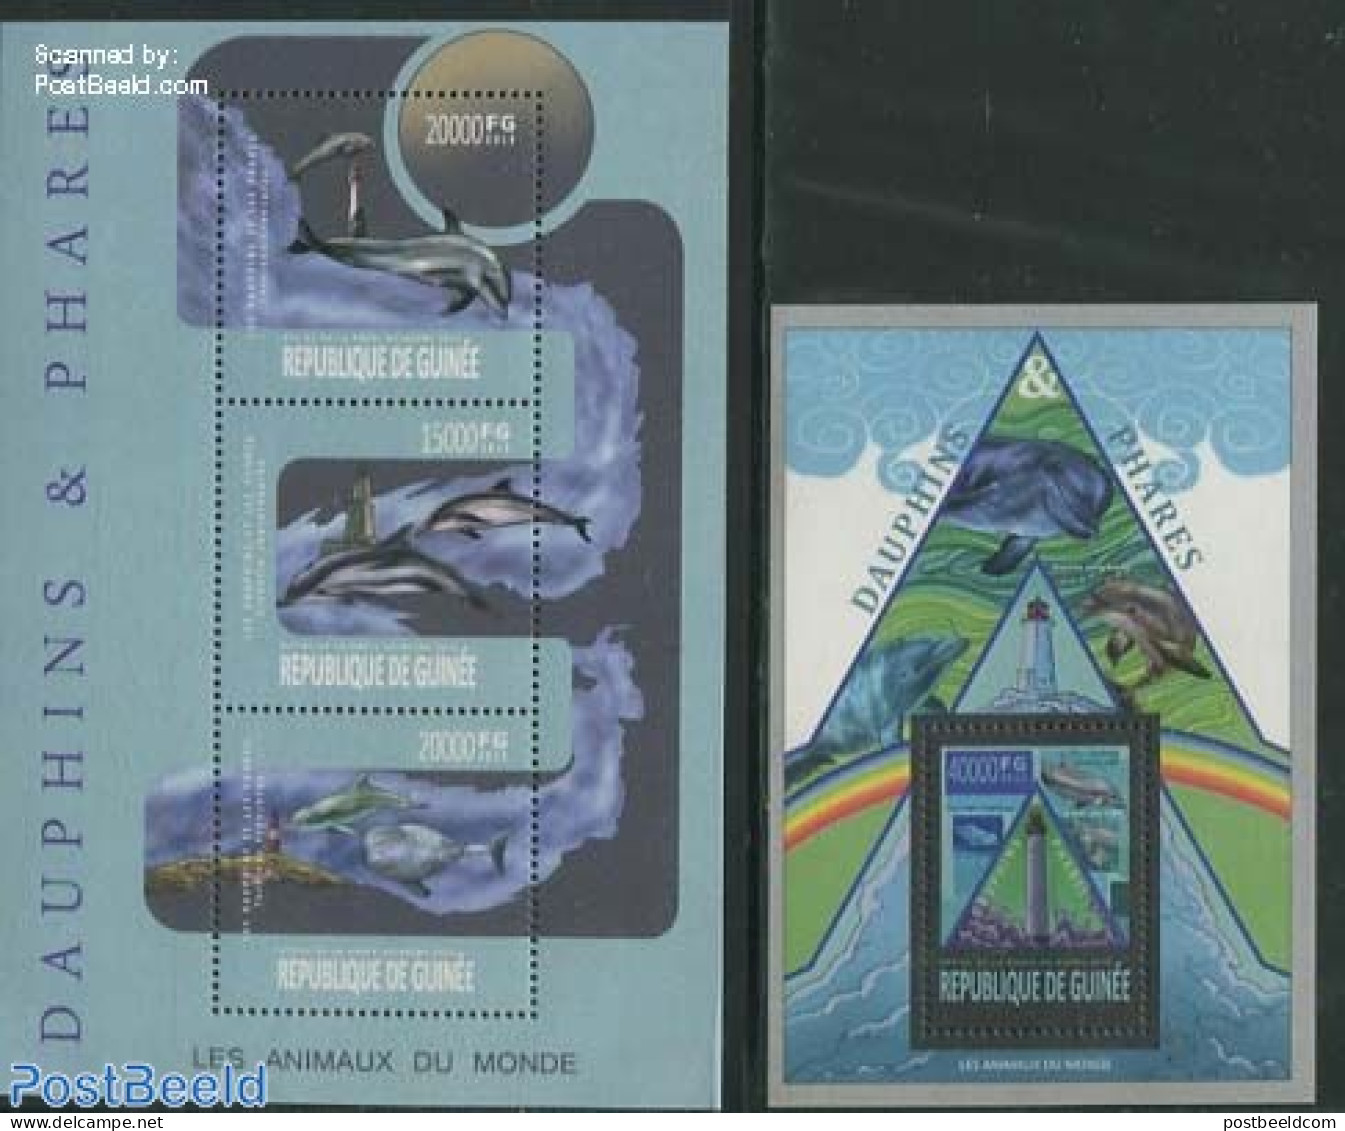 Guinea, Republic 2013 Whales & Lighthouses 2 S/s, Mint NH, Nature - Various - Sea Mammals - Lighthouses & Safety At Sea - Lighthouses